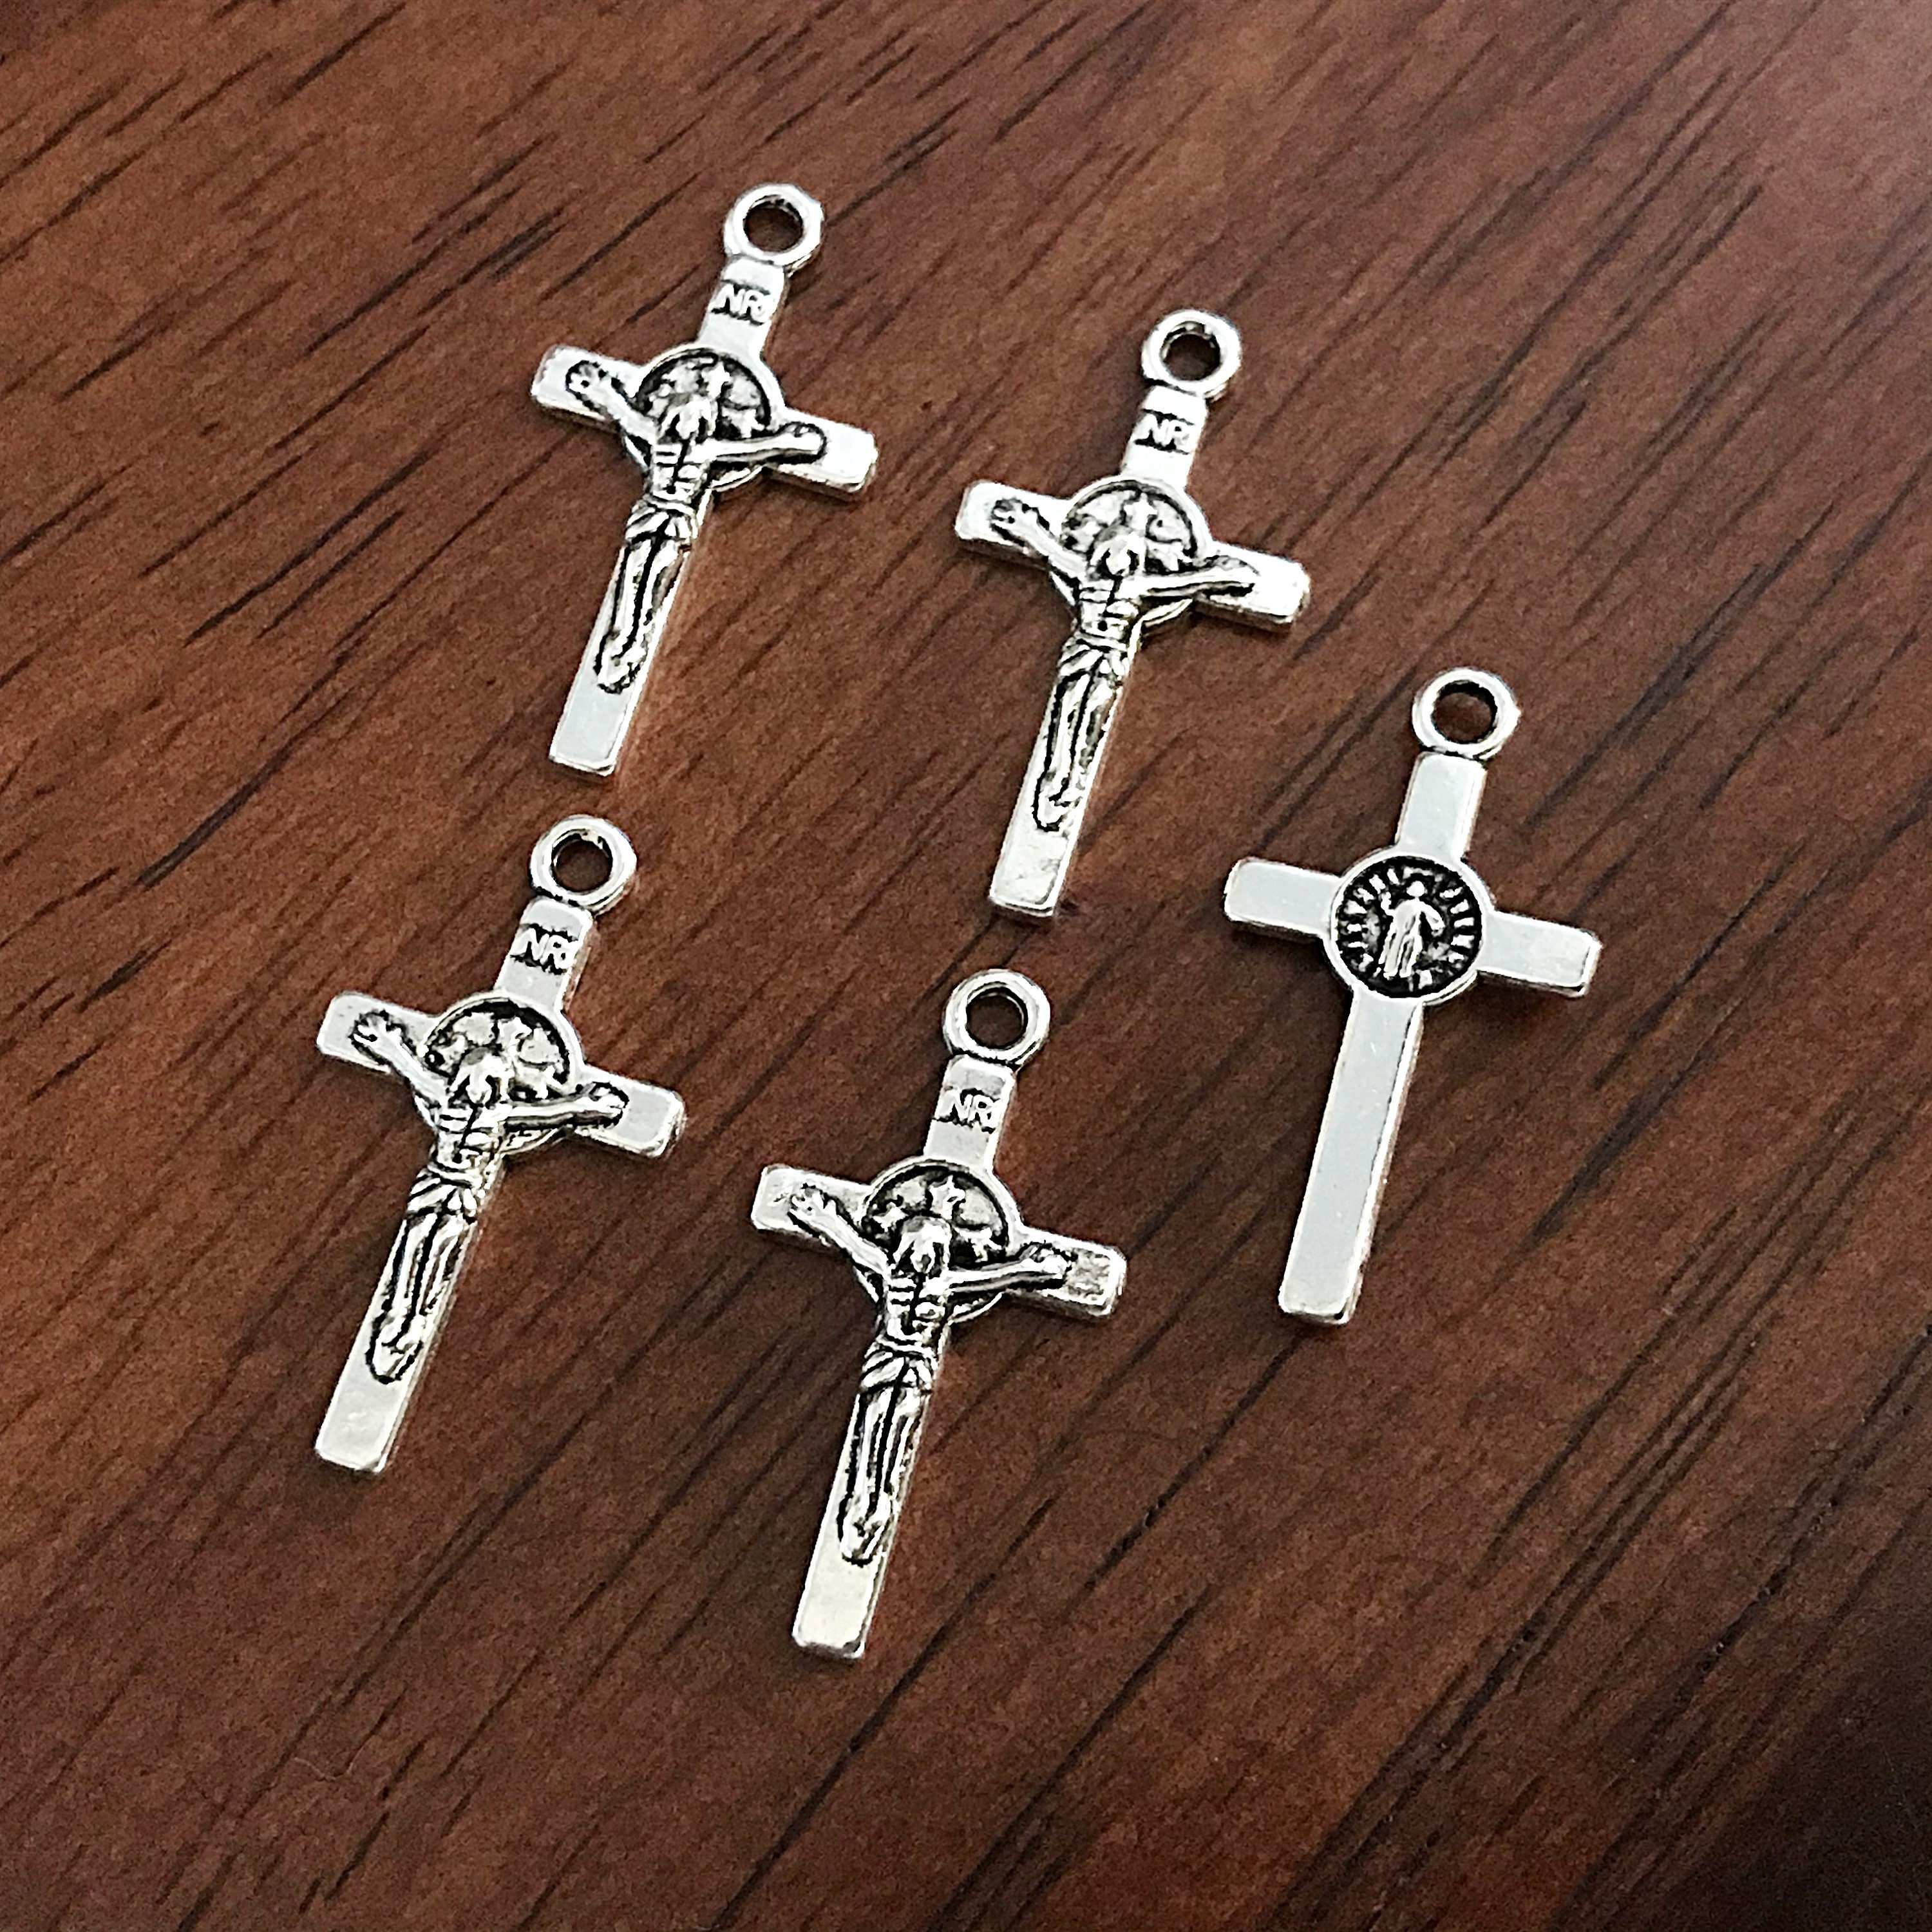 Buy Caritas et Fides Italian Rosary Making Kit for 5 Rosaries - Catholic  Rosary Cross and Center Sets with 1.5” St Benedict Crucifix and 1”  Miraculous Medal Rosary Center Pack of 5